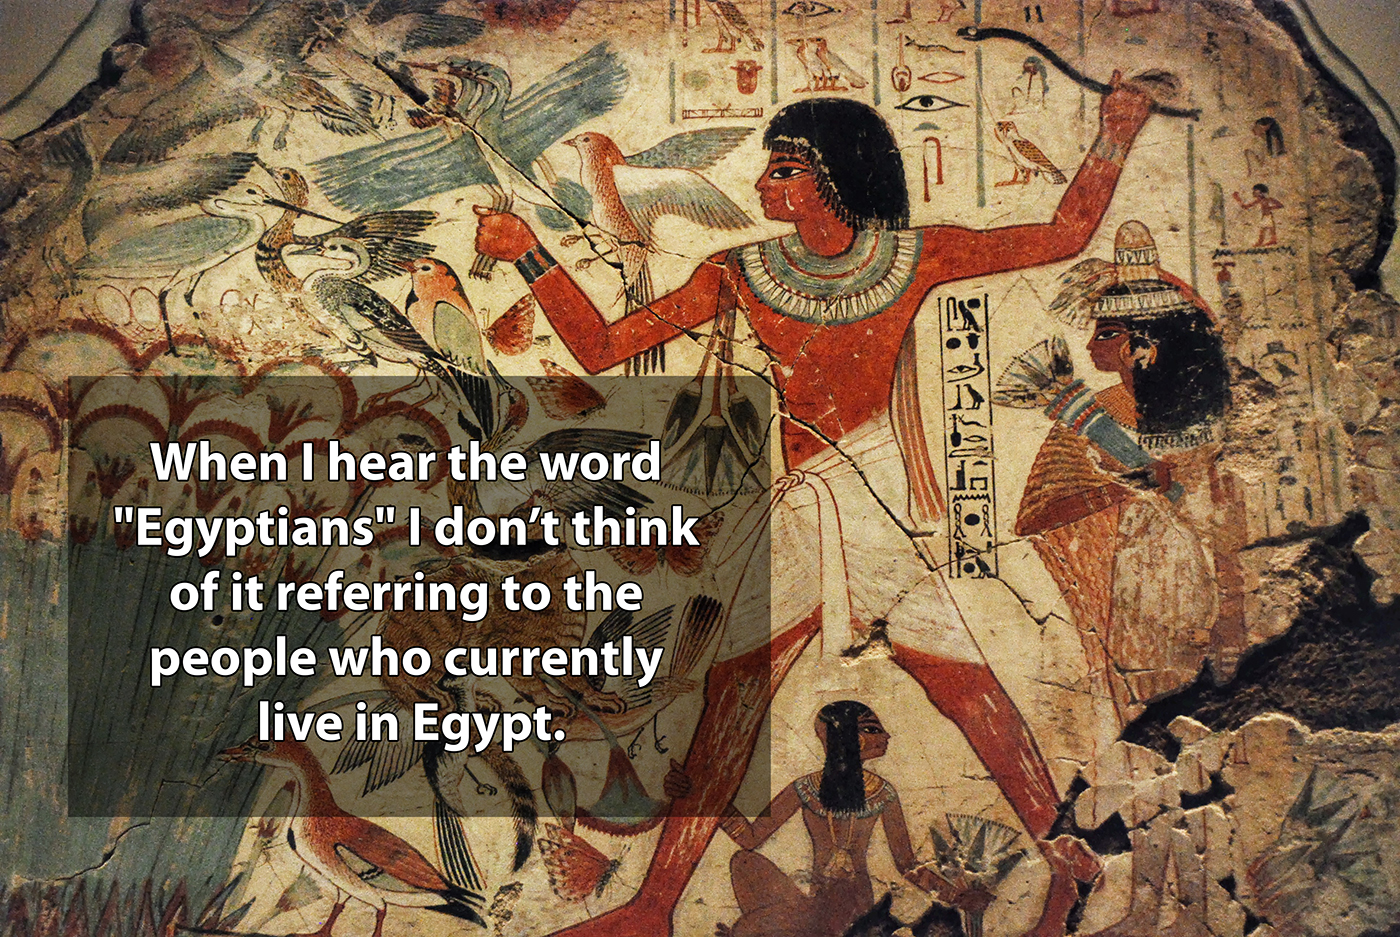 shower thought ancient history - When I hear the word "Egyptians" I don't think of it referring to the people who currently live in Egypt.